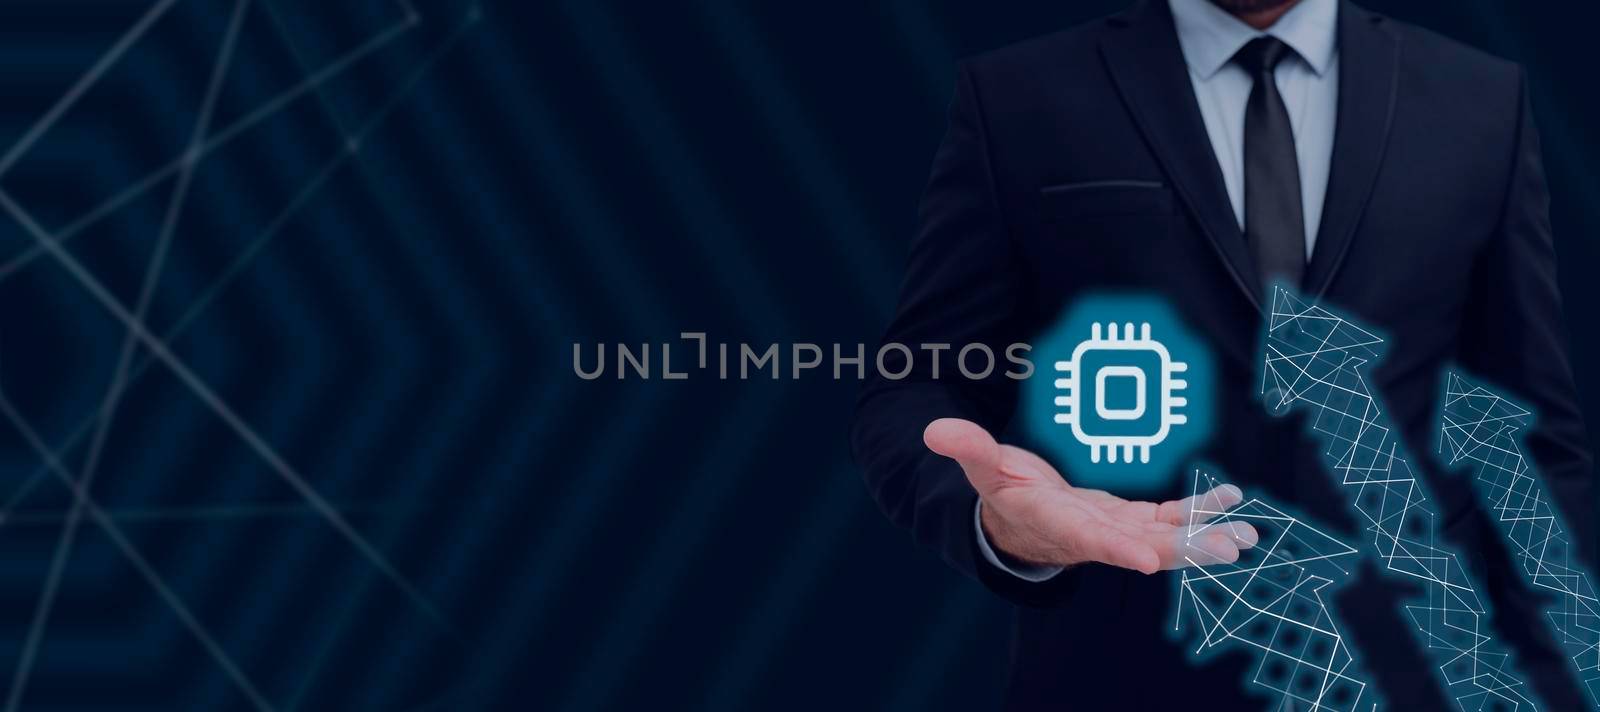 Businessman With A Hand Presenting Arrows Going Up And A Microchip Digital With A Futuristic Design. Man In Suit Showing Symbols And Crucial Information. by nialowwa